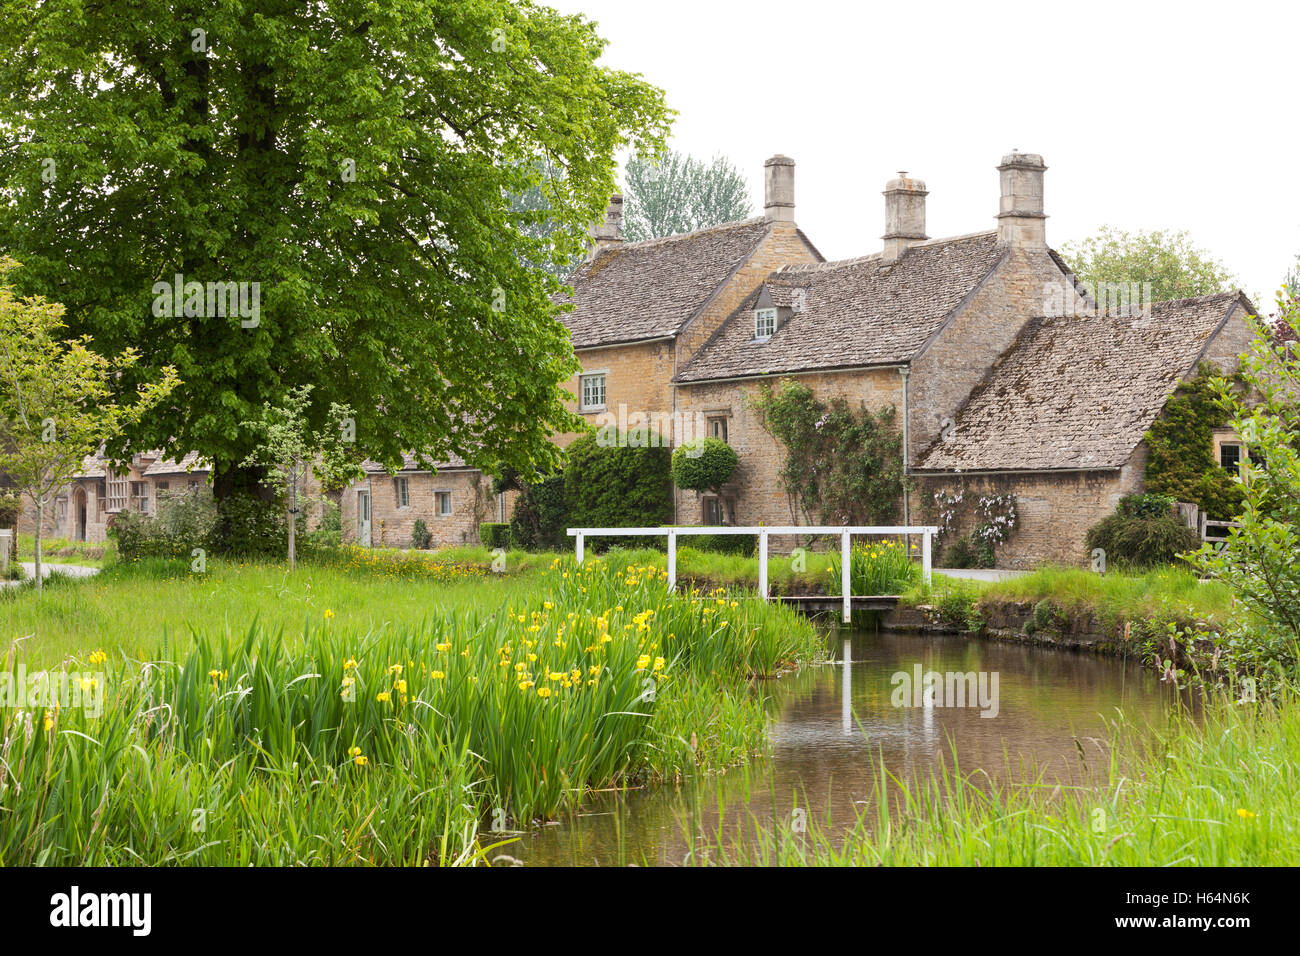 Row of stone houses near wooden bridge over small river in rural English village on overcast day Stock Photo